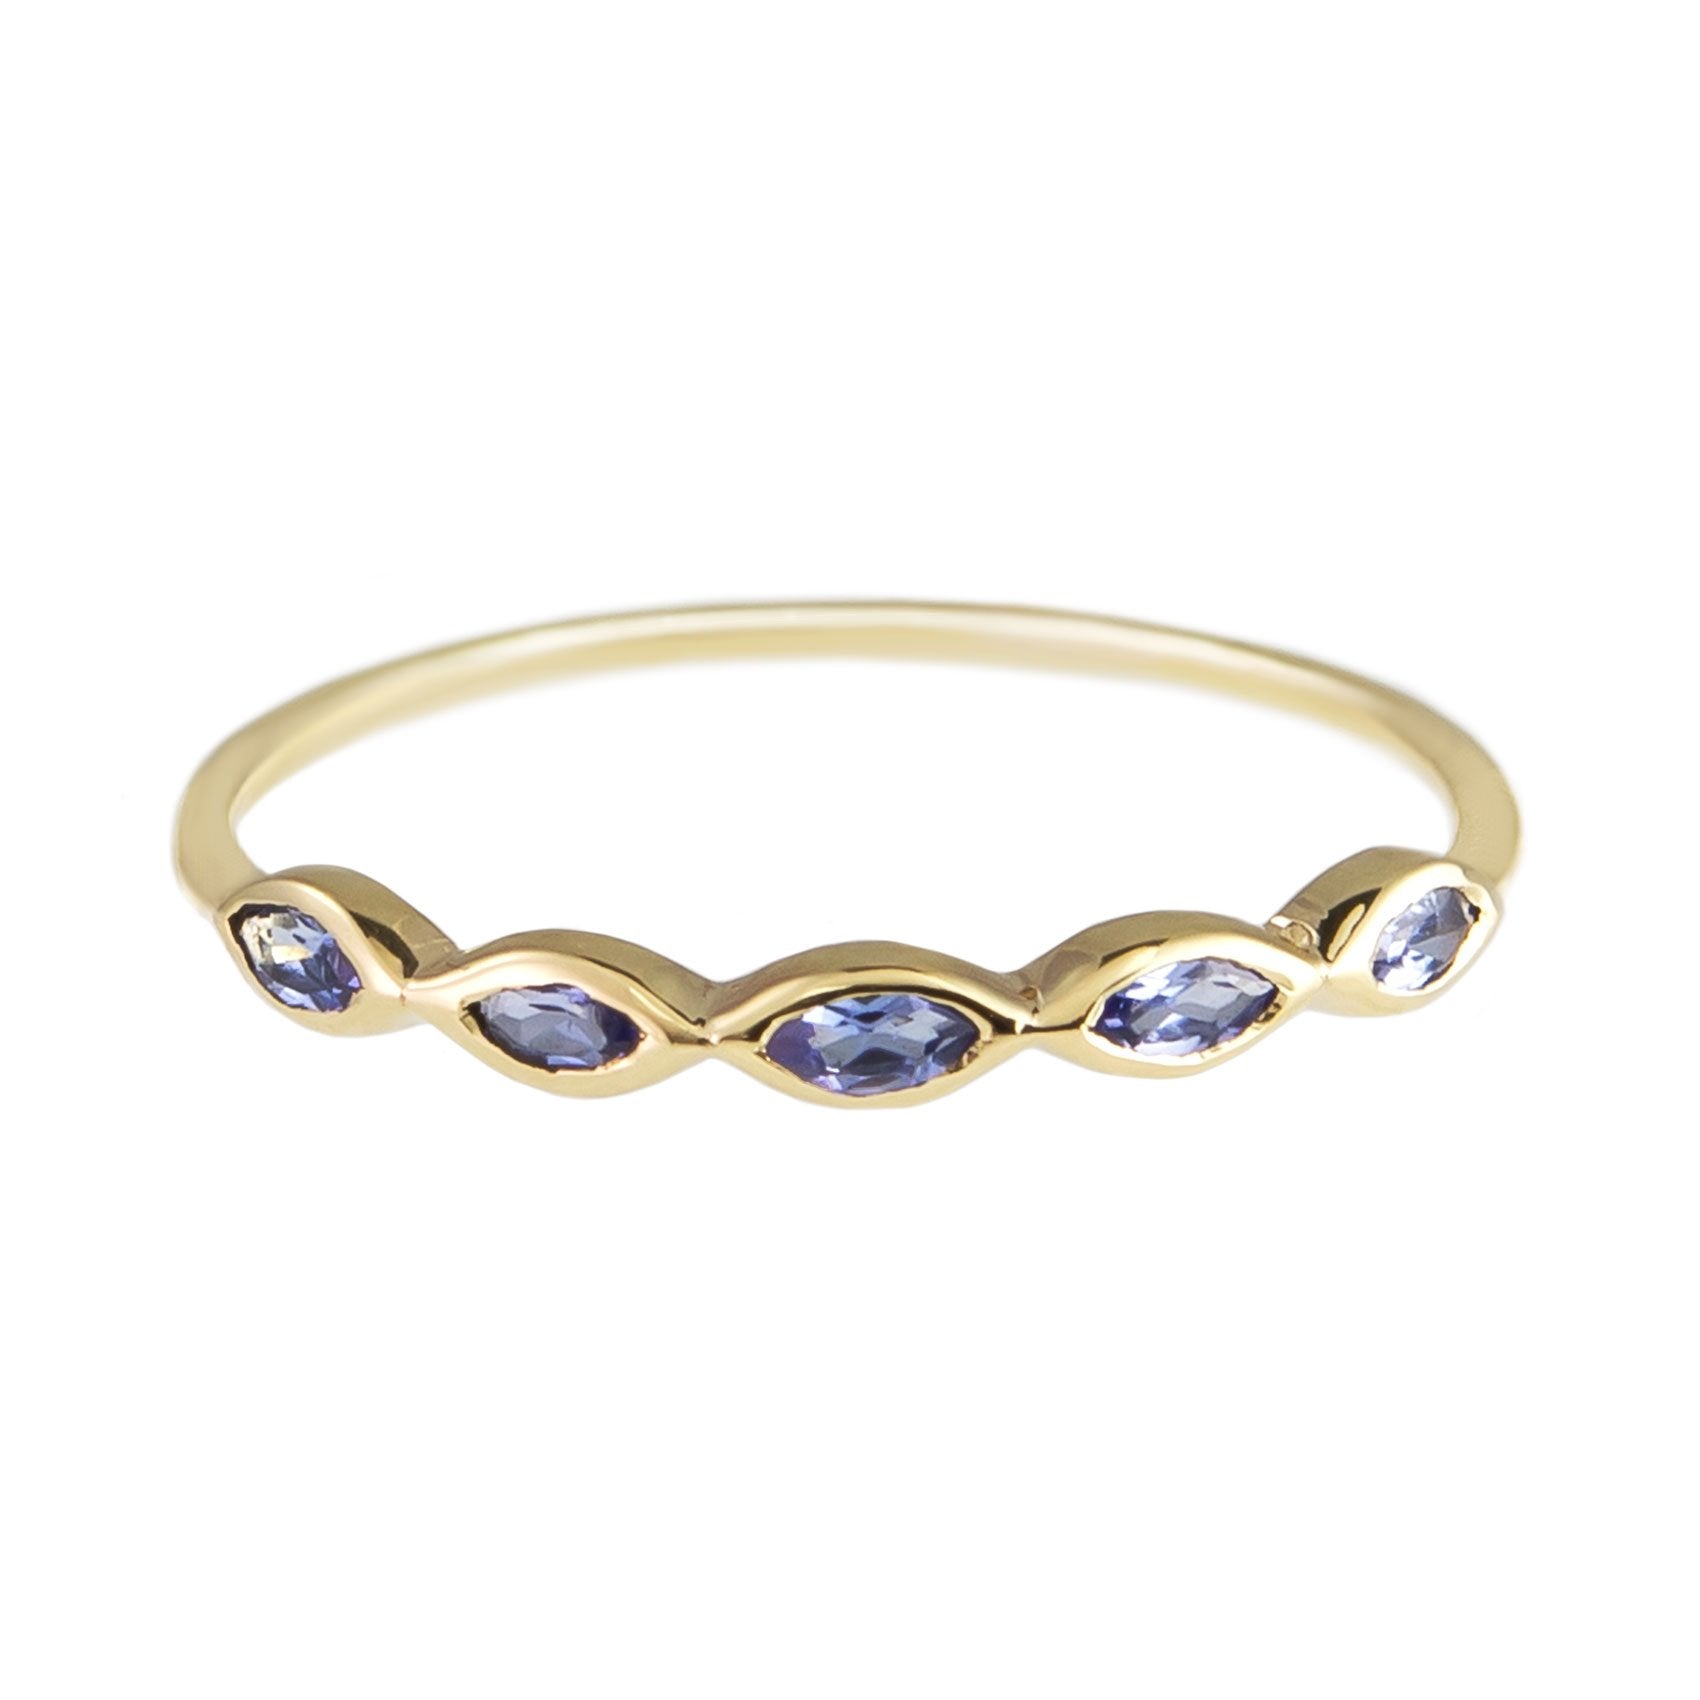 Metier by tomfoolery 5 Stone Tanzanite Ring in 9ct yellow gold with marquise cut tanzanites